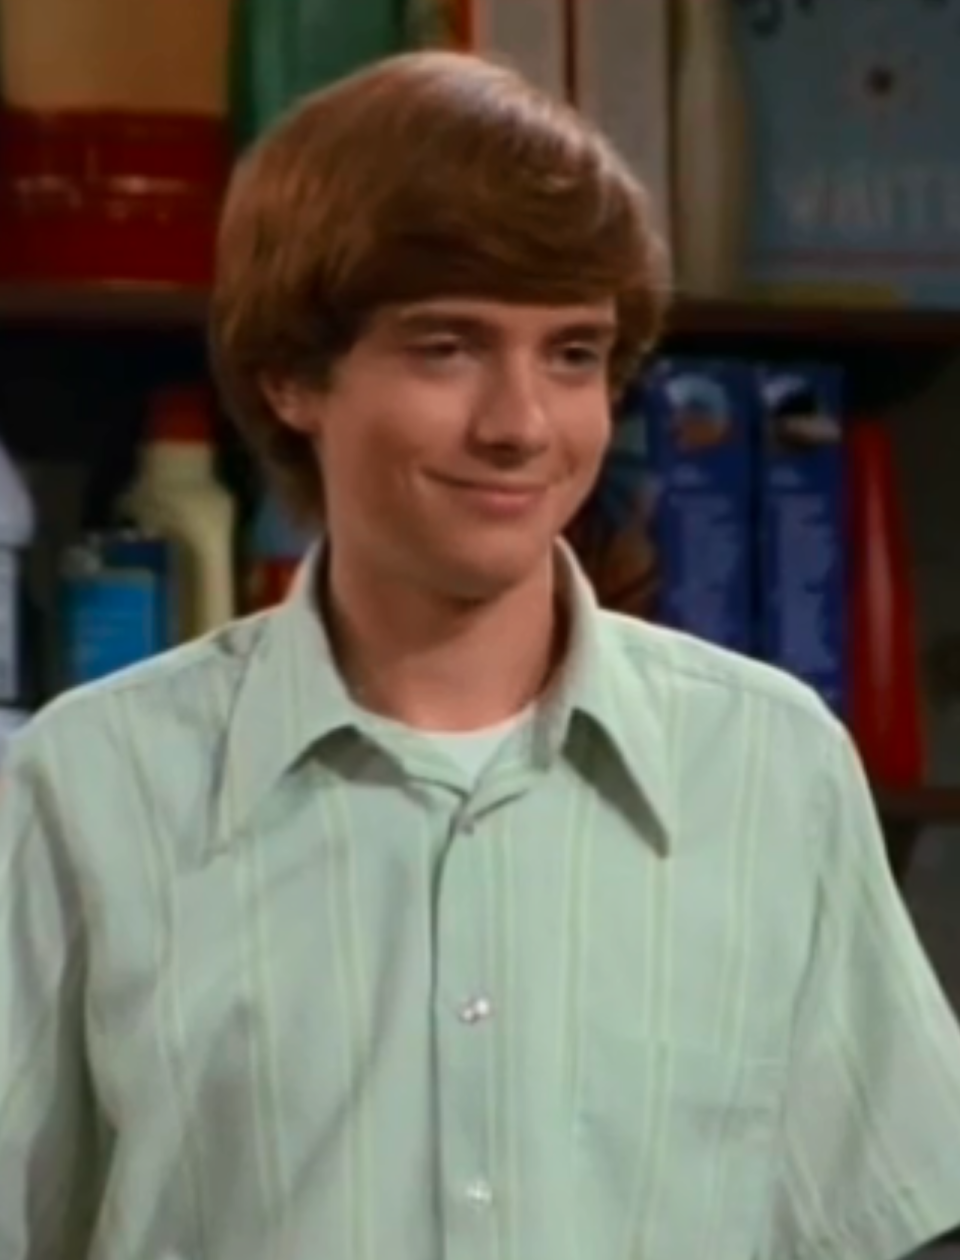 Topher Grace as Eric Forman in That '70s Show